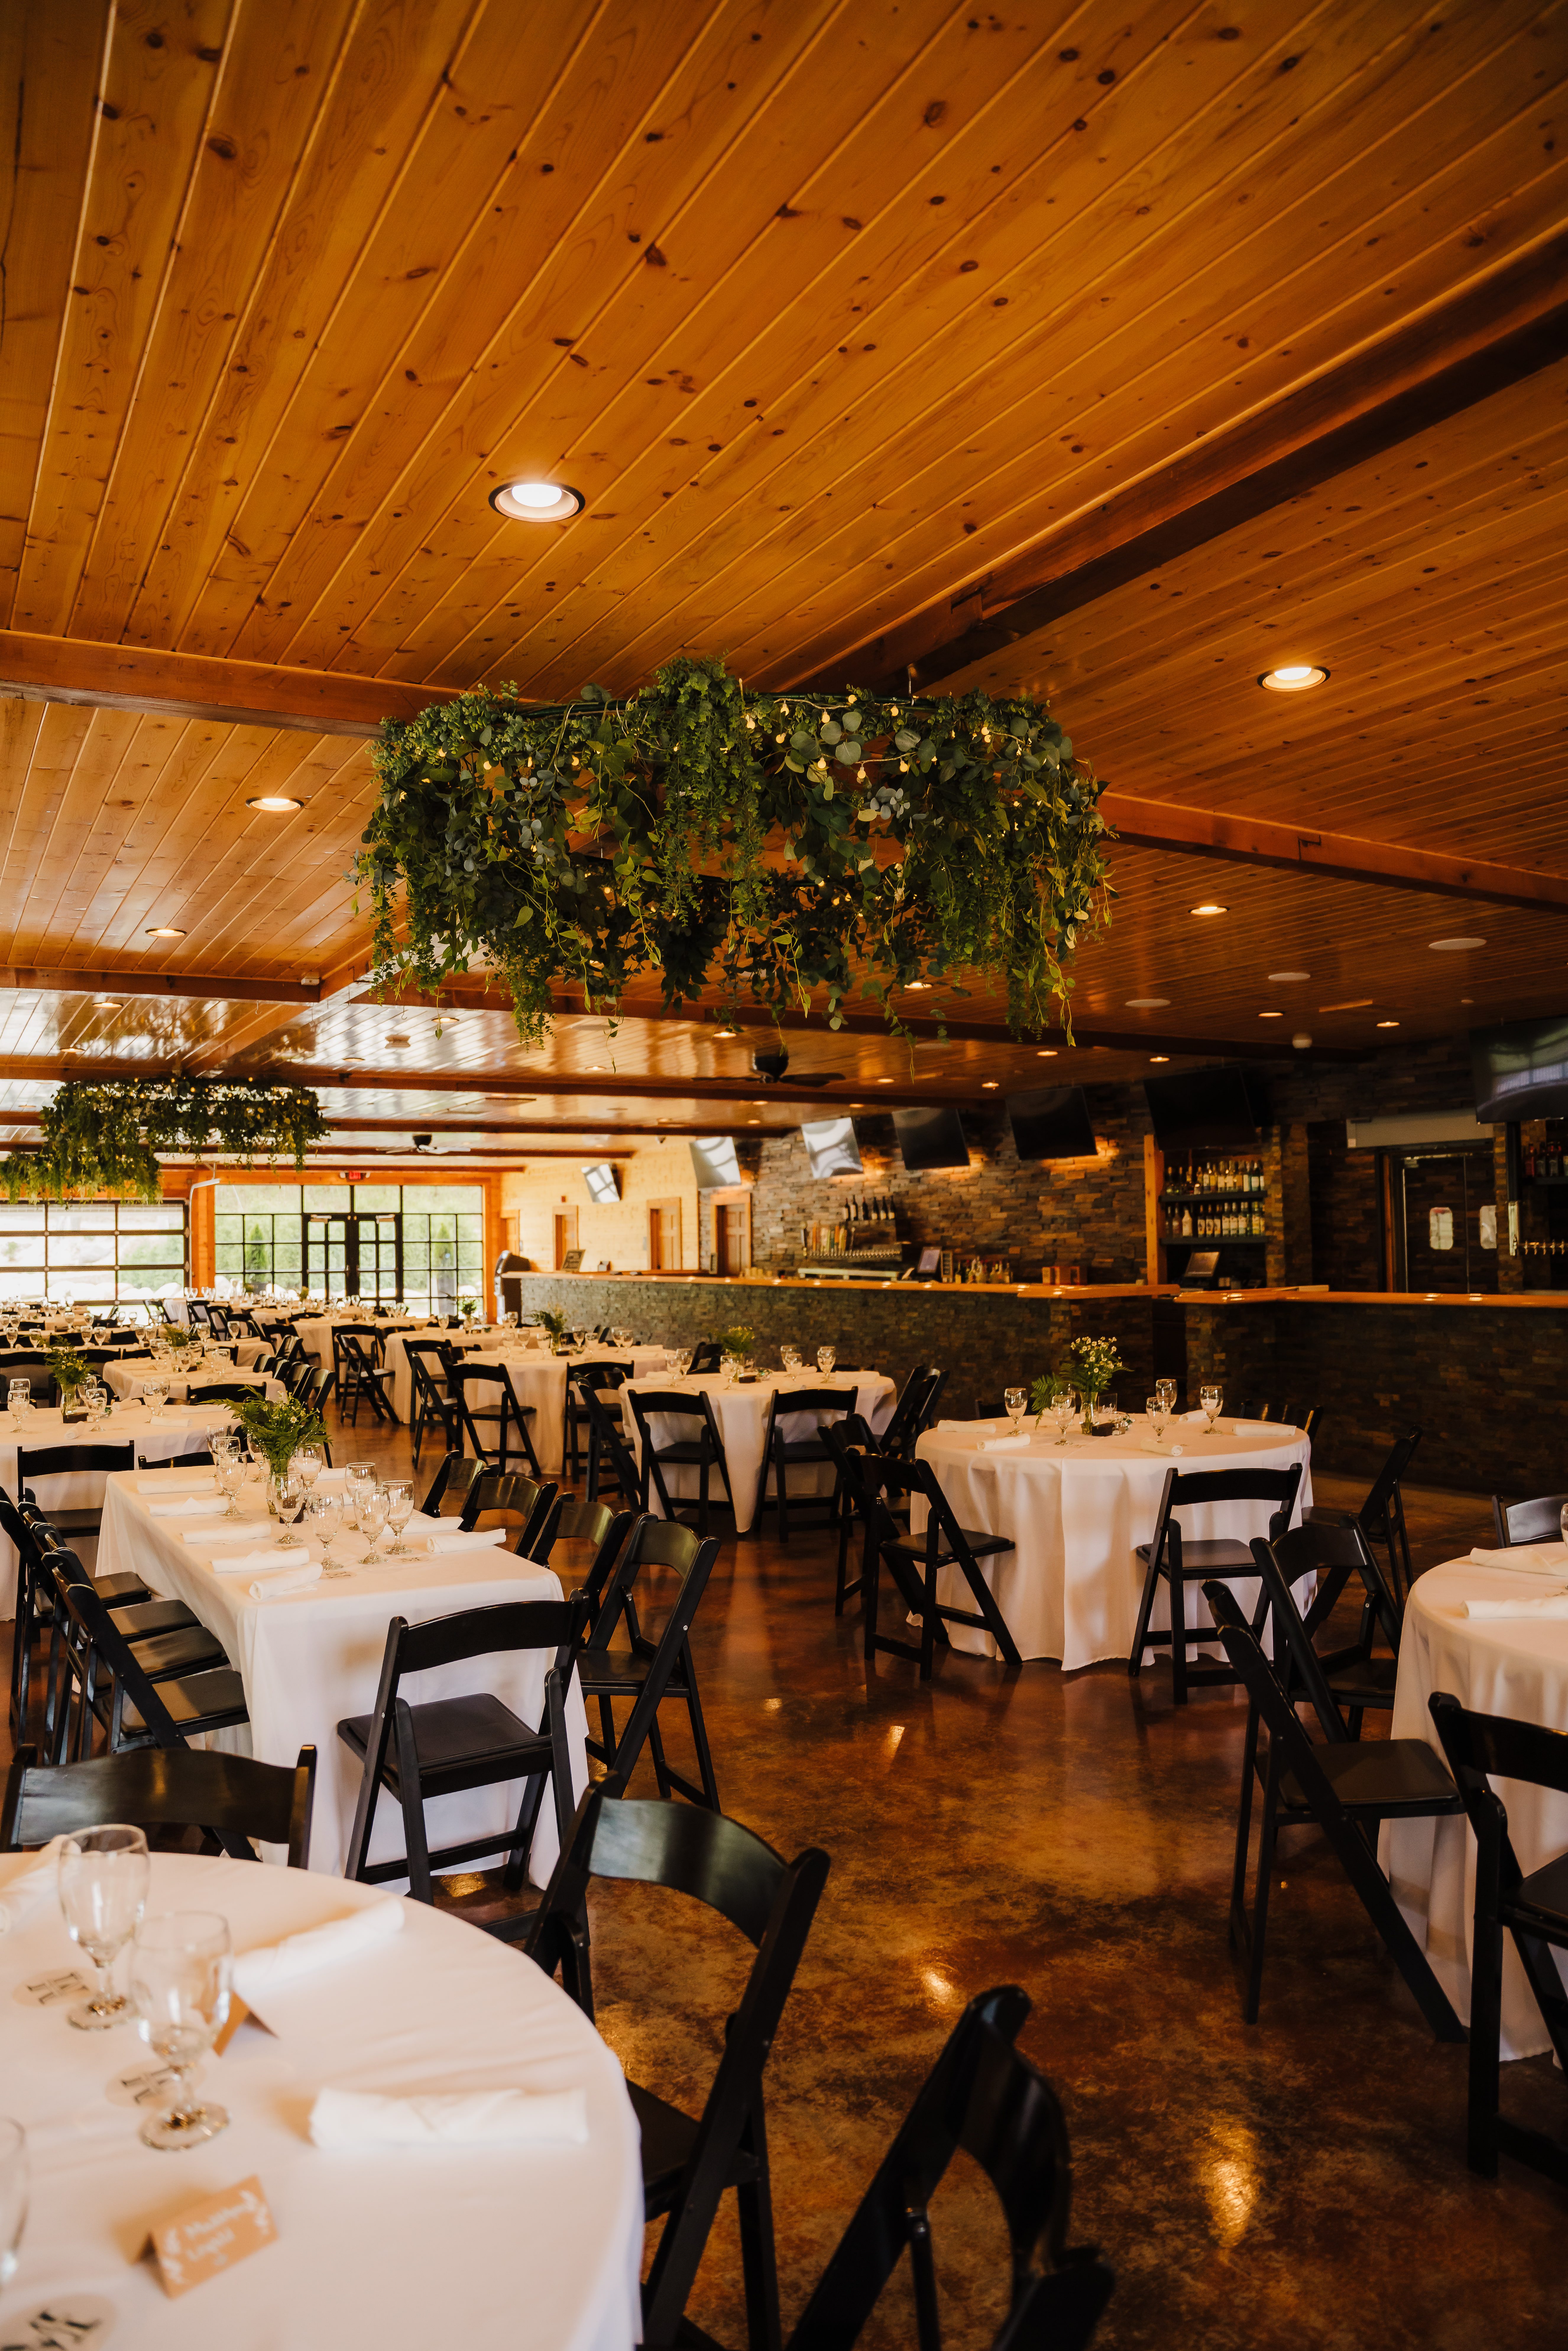 Beautiful greenery hangs from the ceilings at a rustic wedding venue in Wisconsin. Boho wedding decor Wedding reception greenery Forest wedding venue #forestgreenwedding #rusticweddingvenue #weddingplanning #wisconsinweddingphotographer #wisconsinweddingvenue